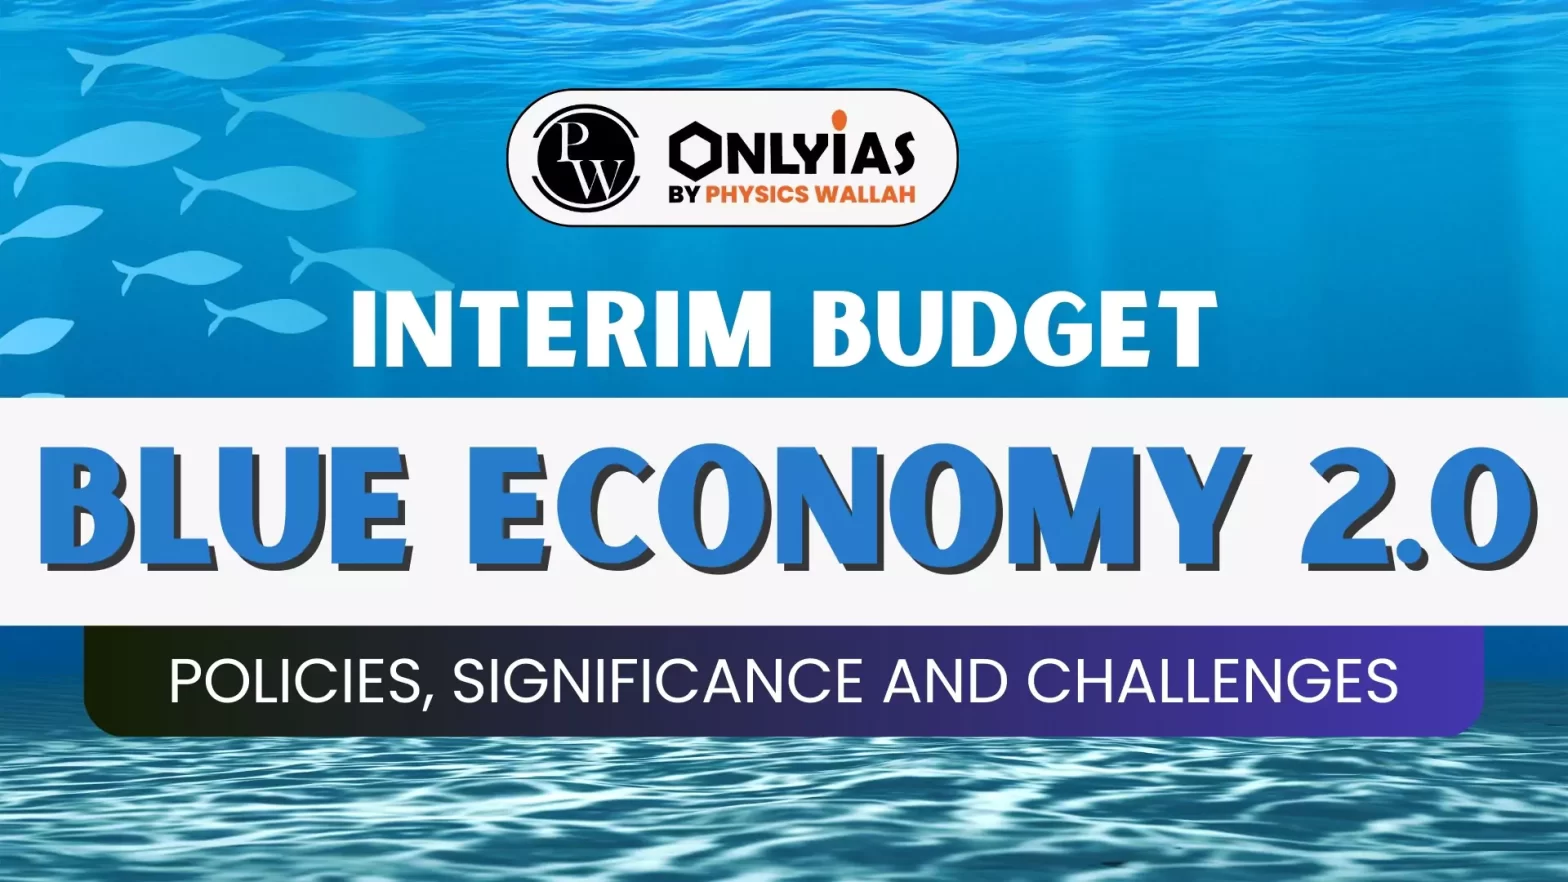 Interim Budget: Blue Economy 2.0: Policies, Significance and Challenges